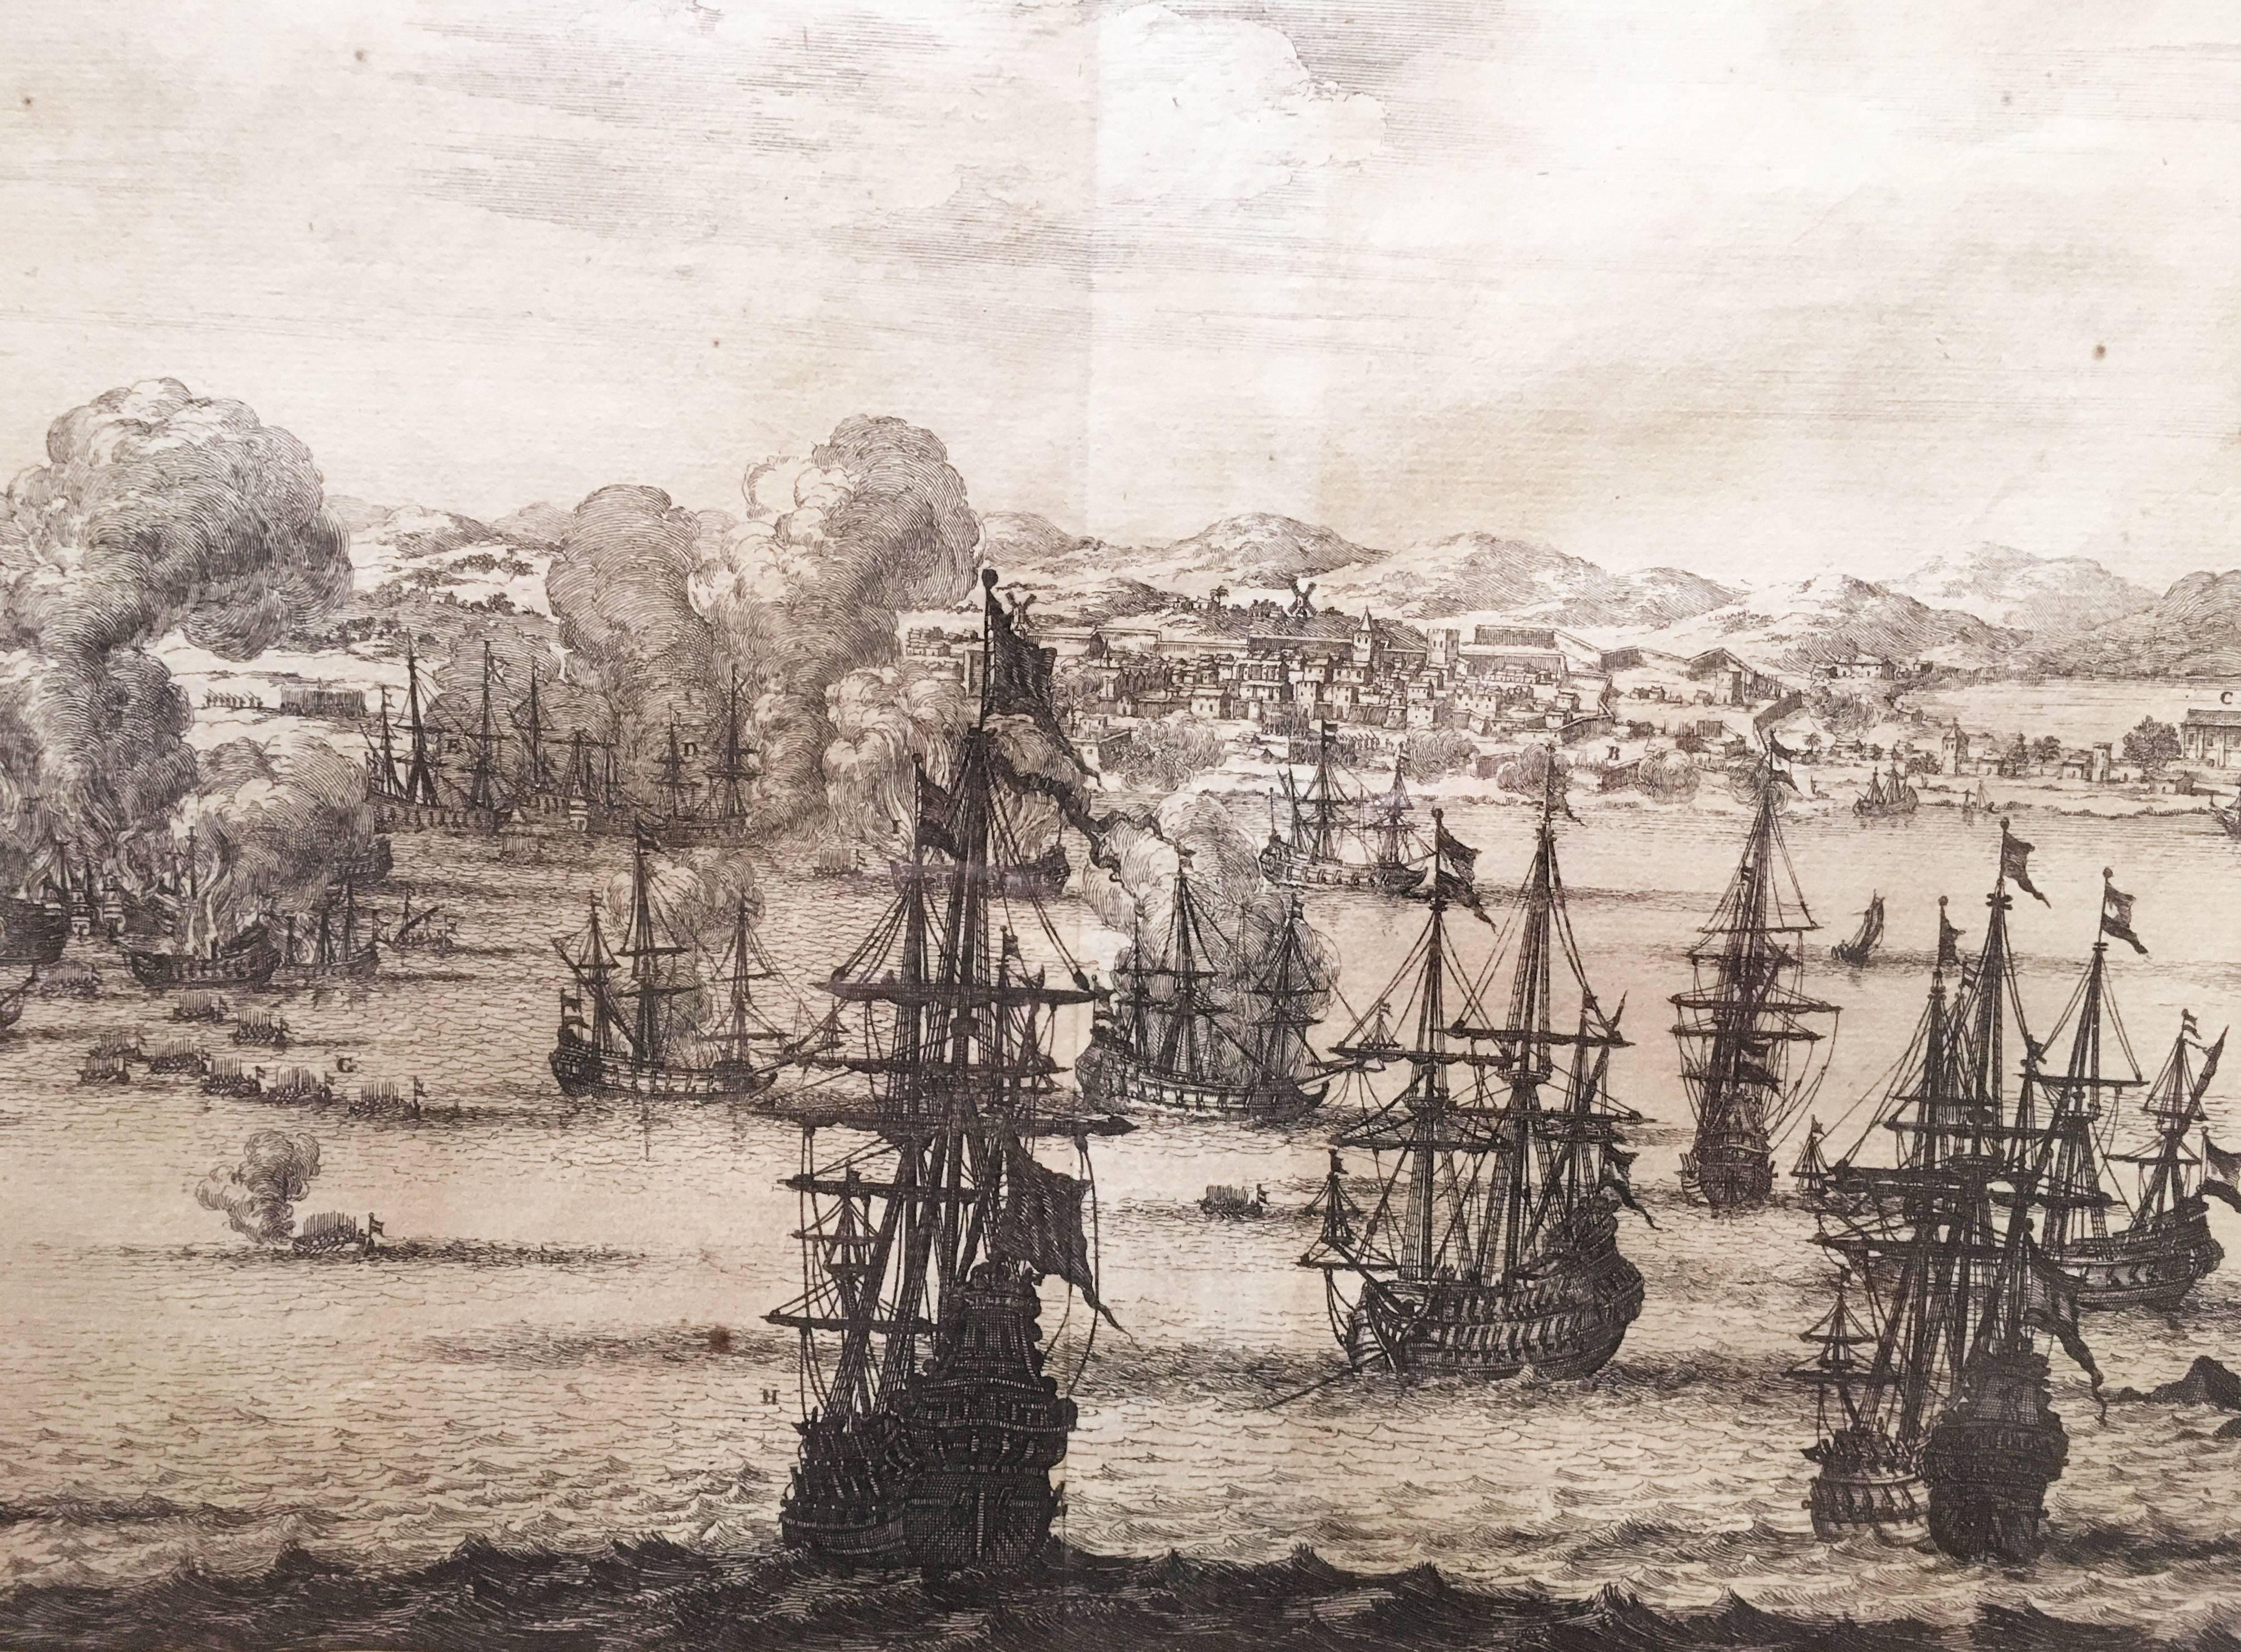 Part of the masterwork of Dutch theologian, explorer, and missionary Arnoldus Mantanus De Nieuwe en Onbekende Weereld from 1671, this theatrical scene of the Port of Lima displays a bustling Harbour full of masted ships. One of the richest cities of